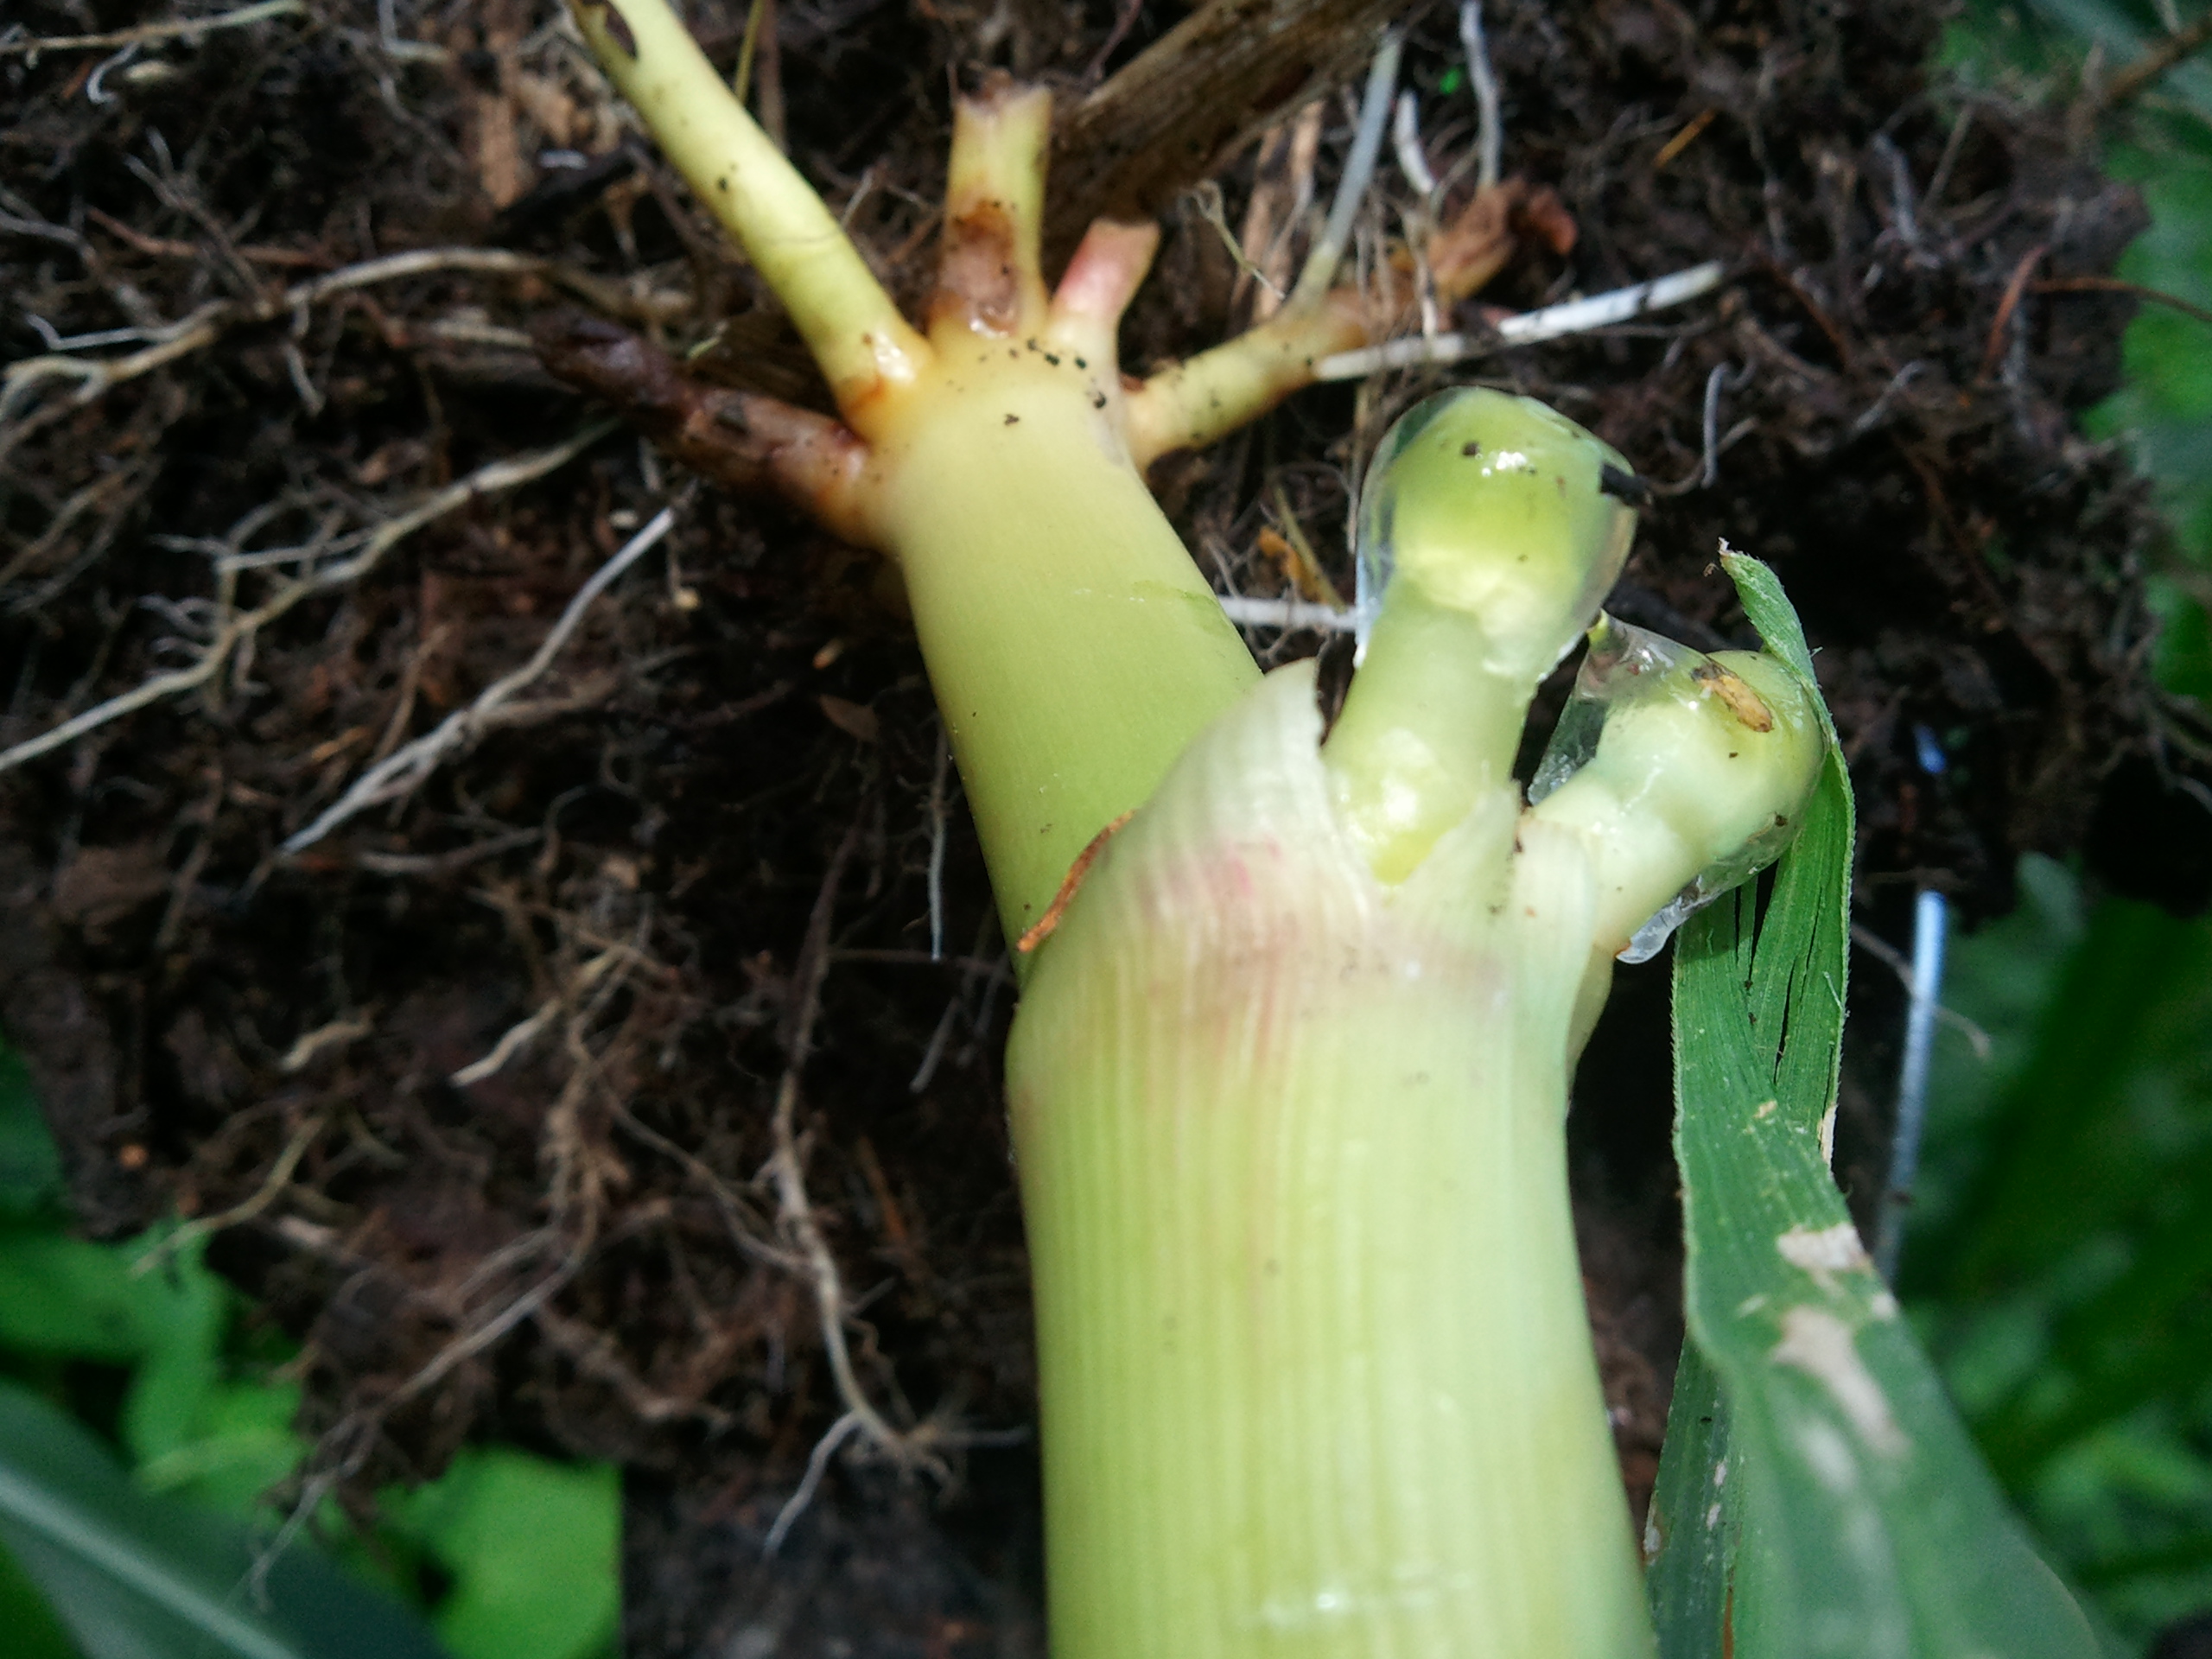 Mucilaginous secretions from teosinte roots, also occurs in high elevation maize